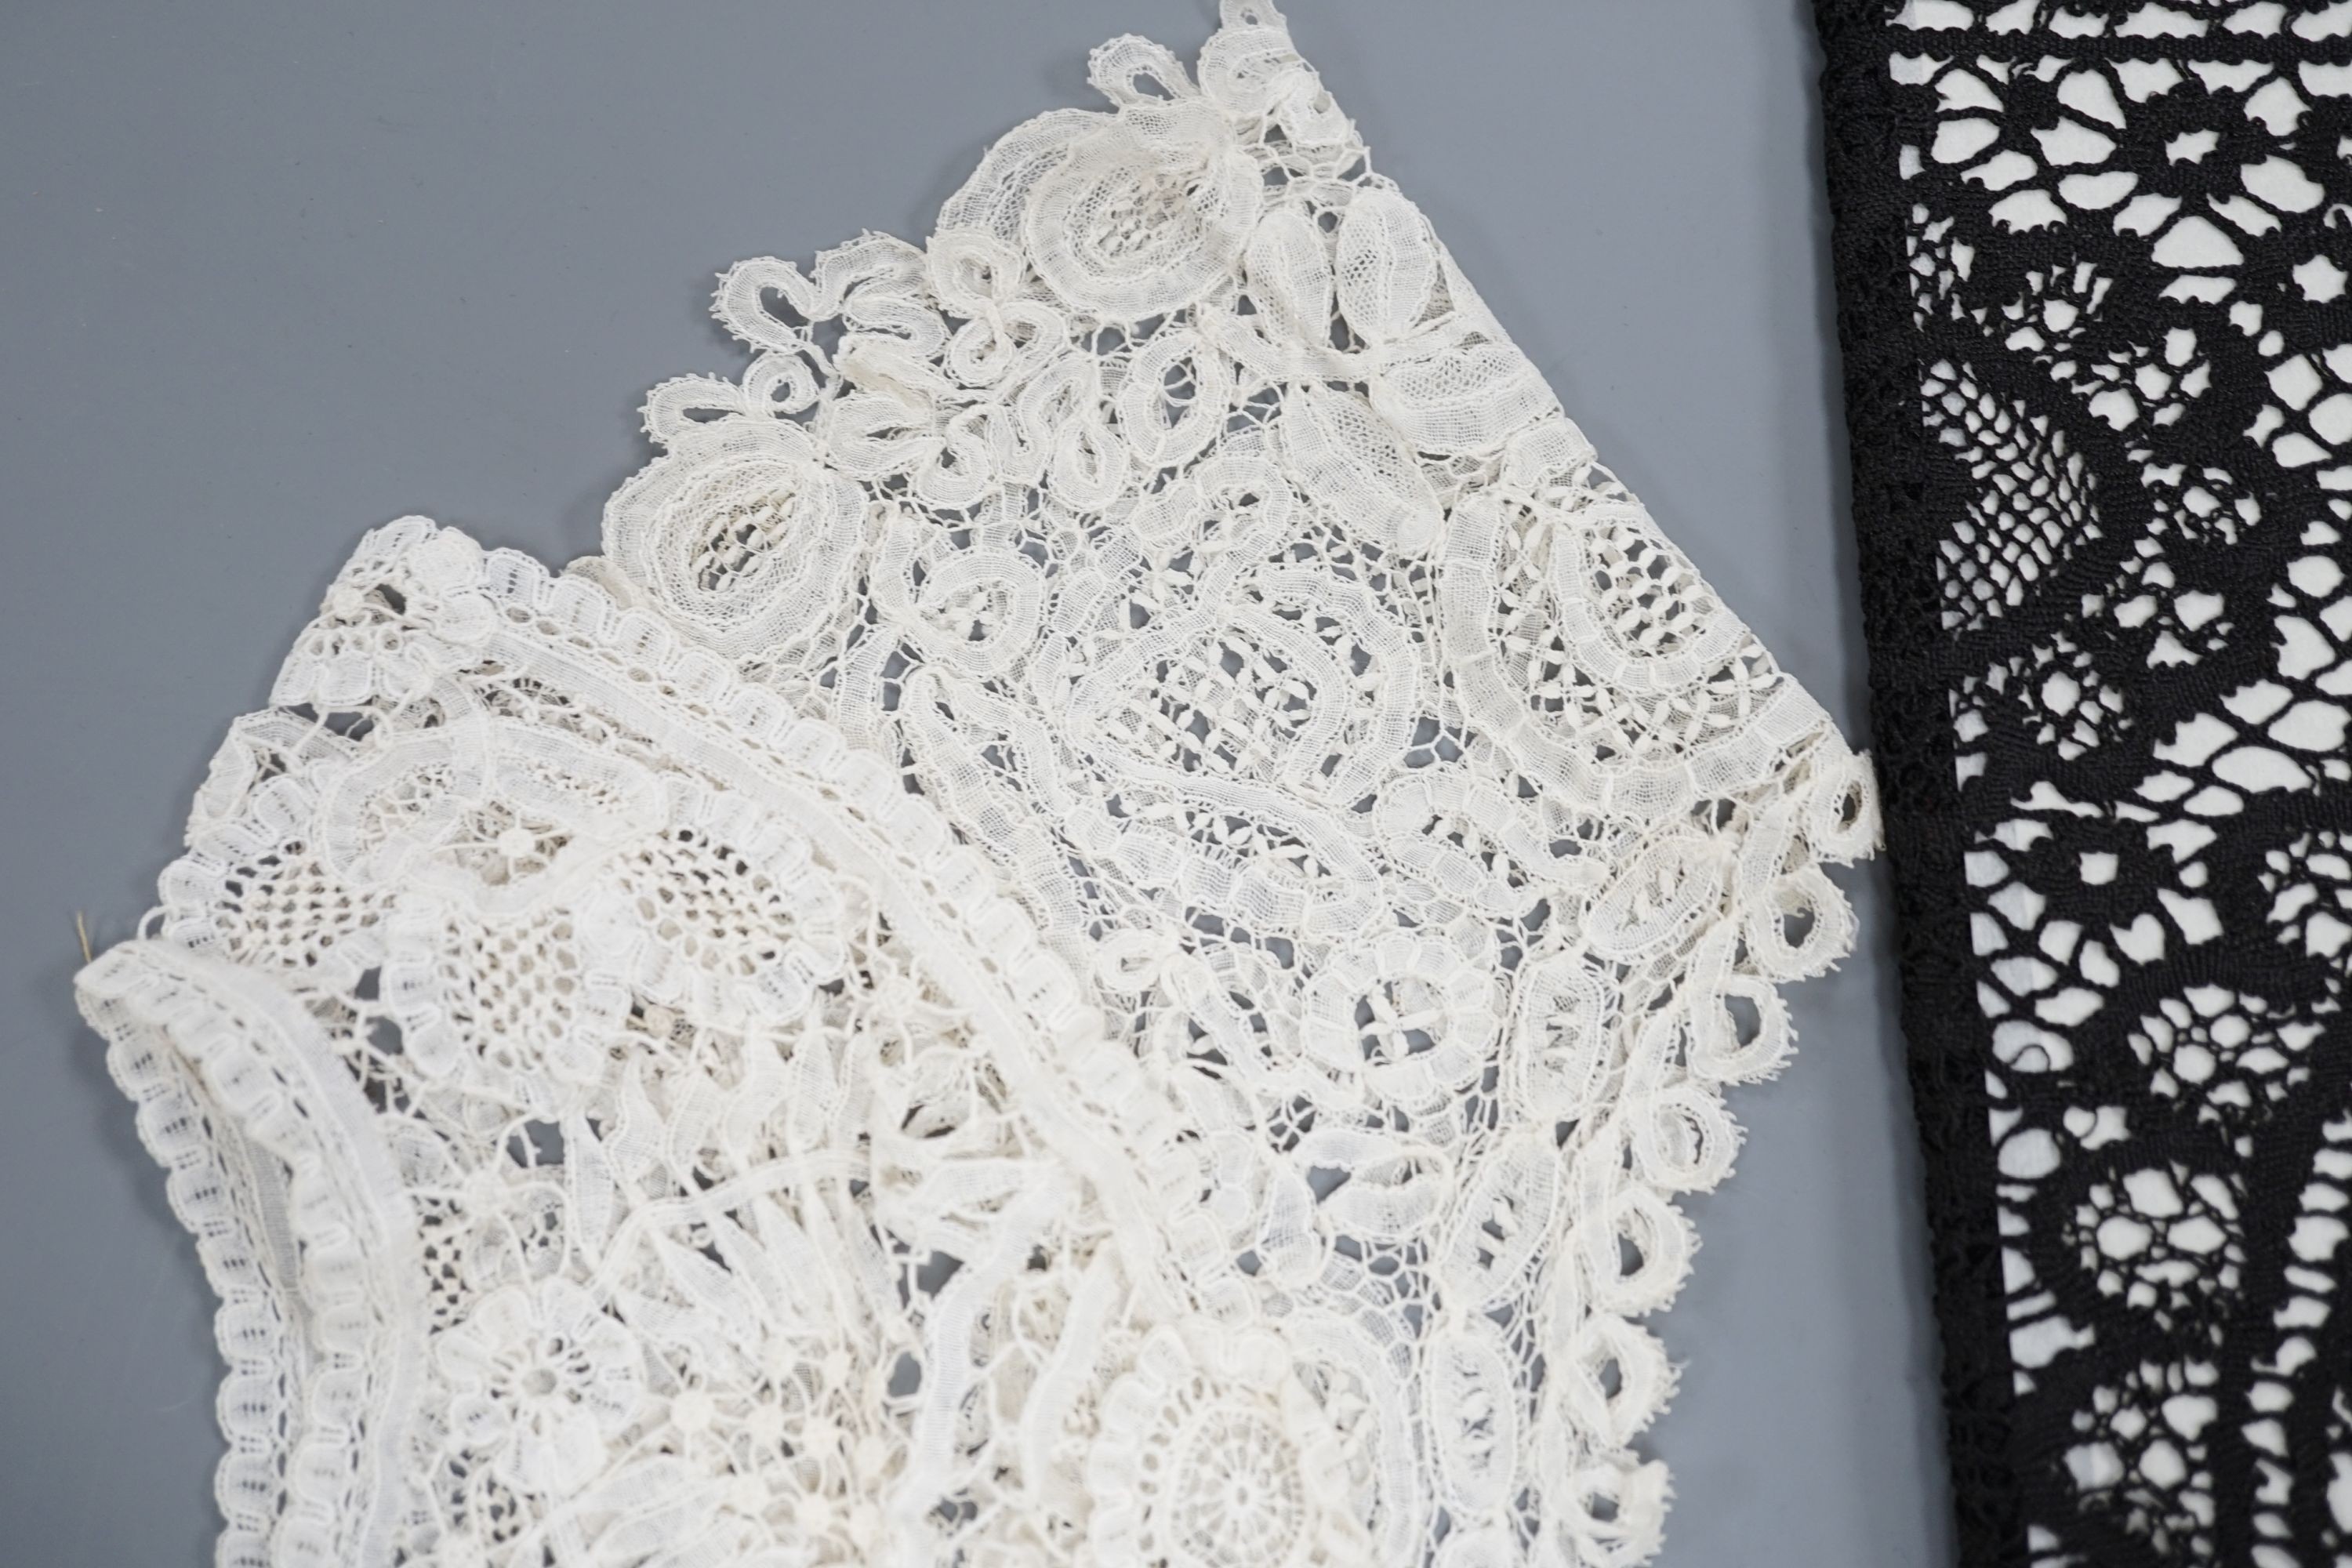 A collection of 19th century hand made bobbin lace and other handmade collars and trimmings, including Honiton, Irish crochet.